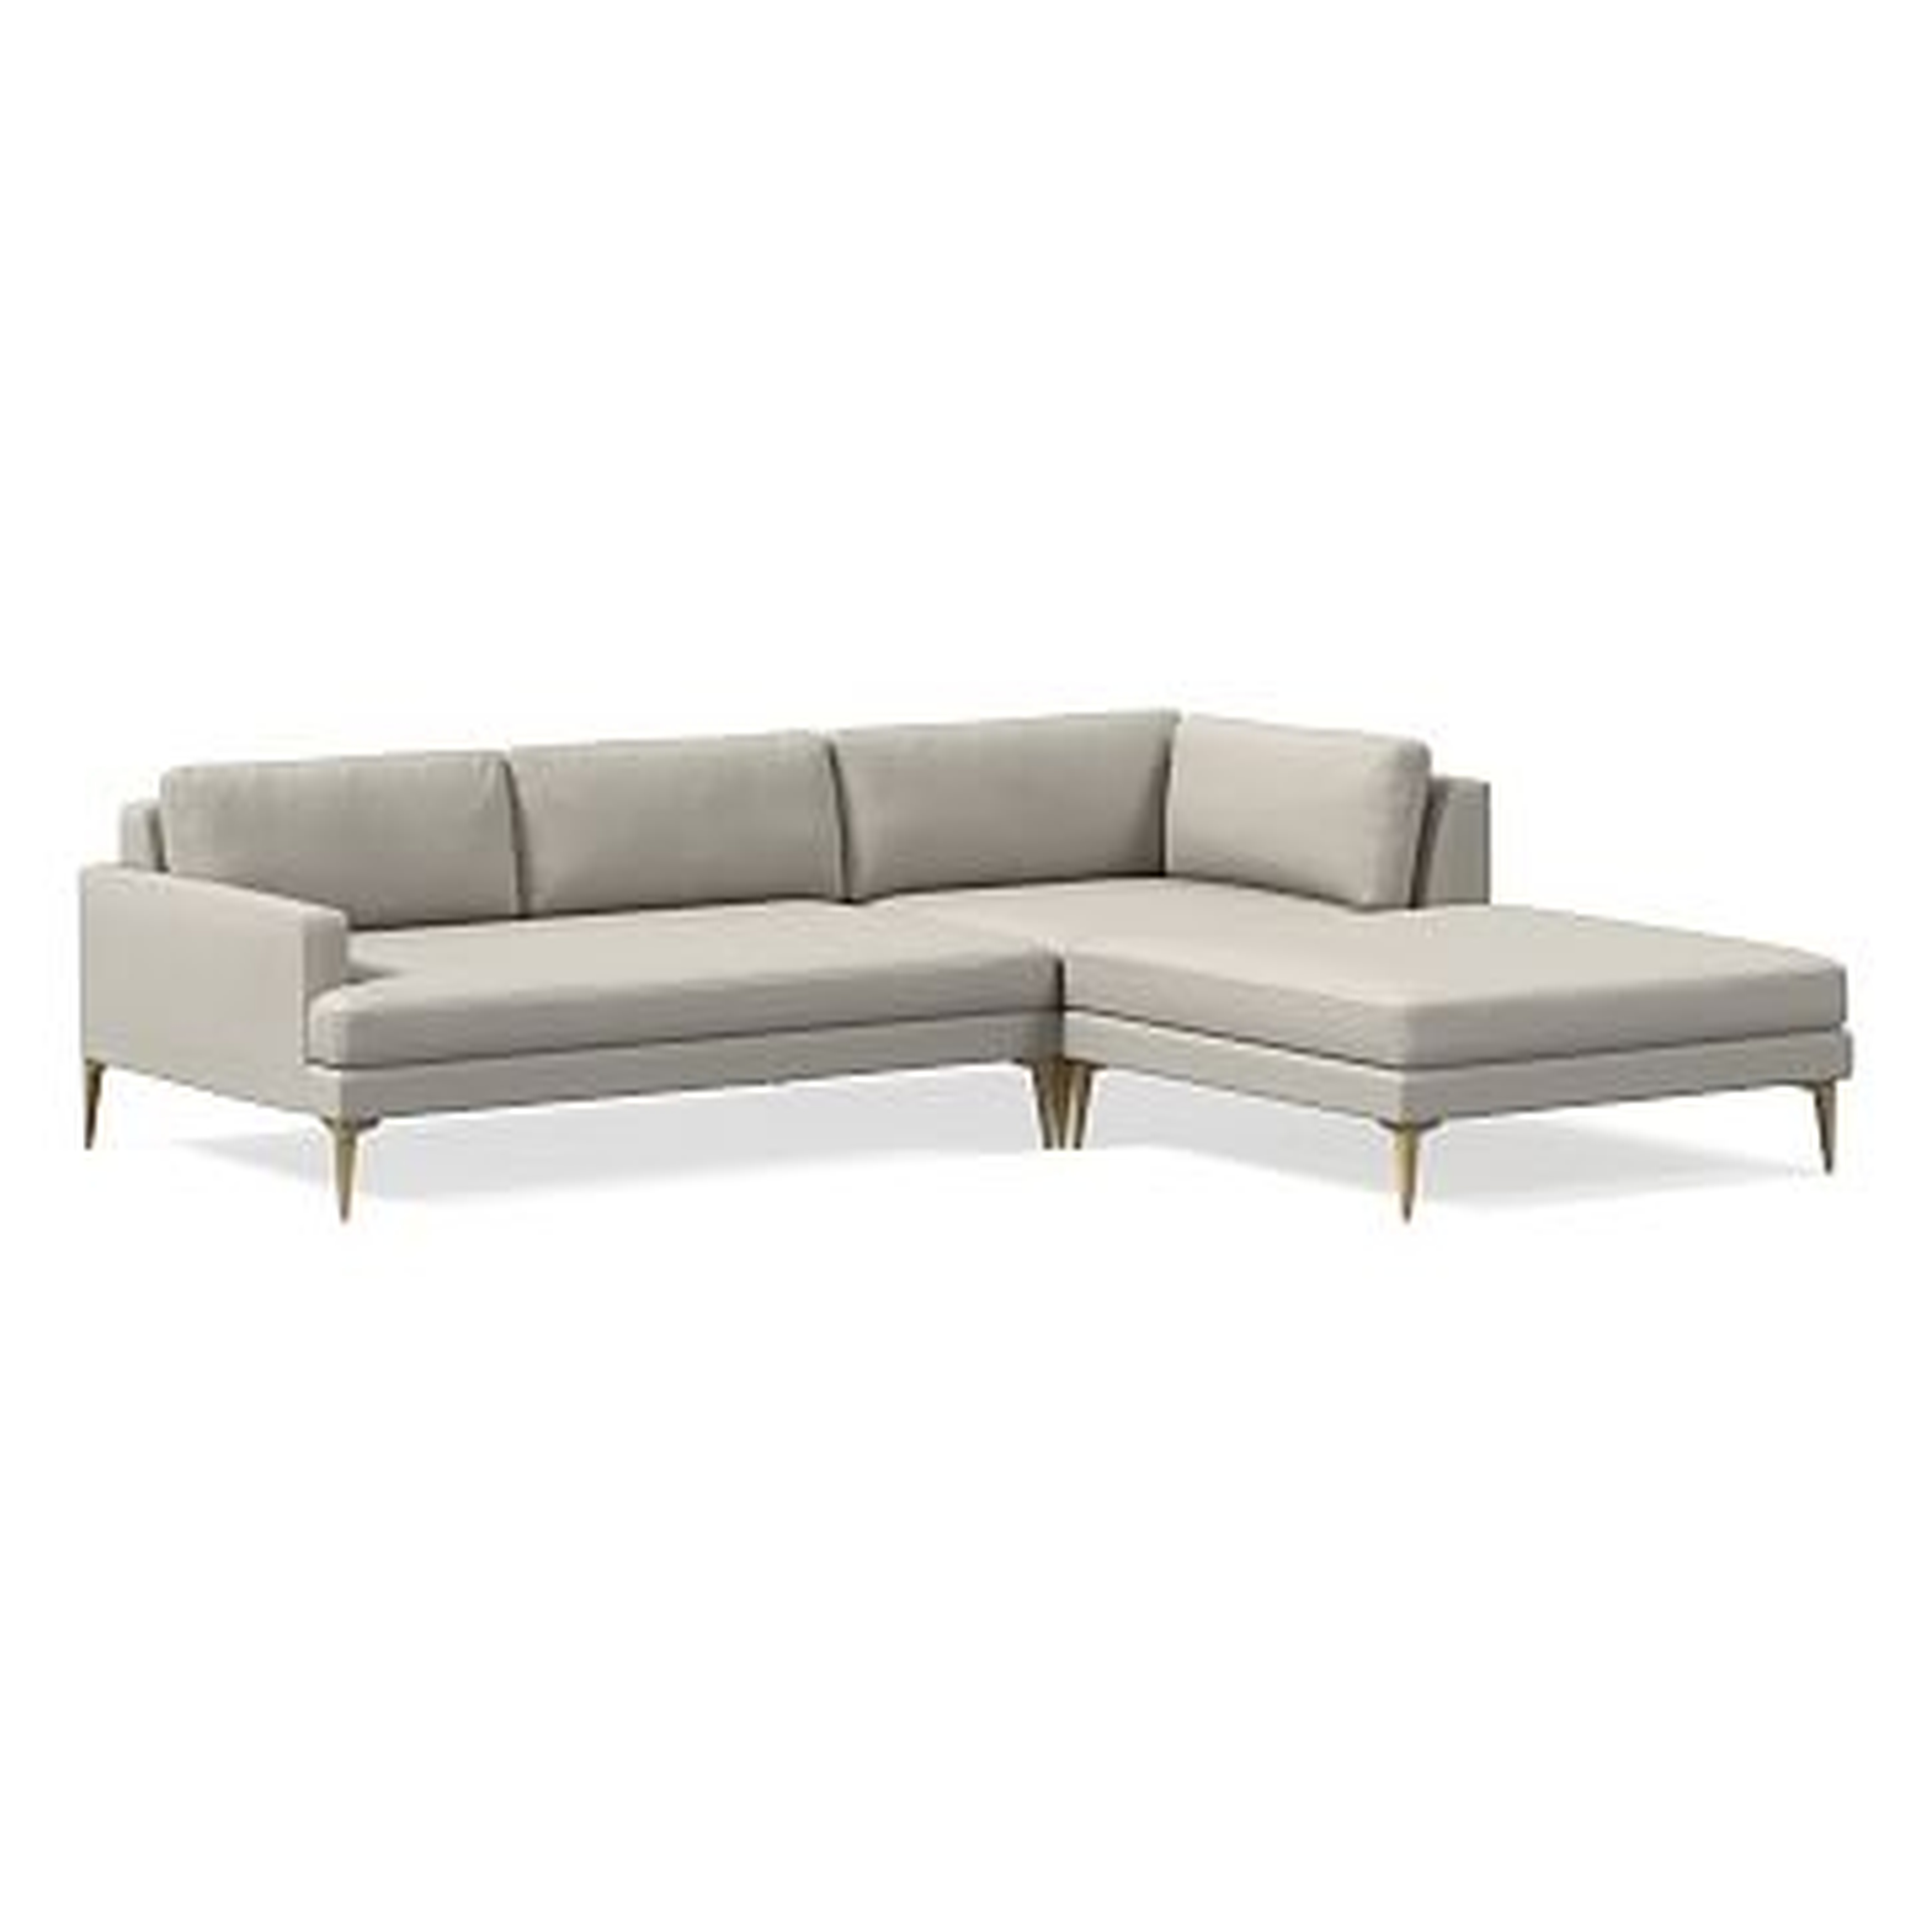 Andes Sectional Set 21: XL Left Arm 2.5 Seater Sofa, XL Corner, XL Ottoman, Poly, Twill, Dove, Blackened Brass - West Elm